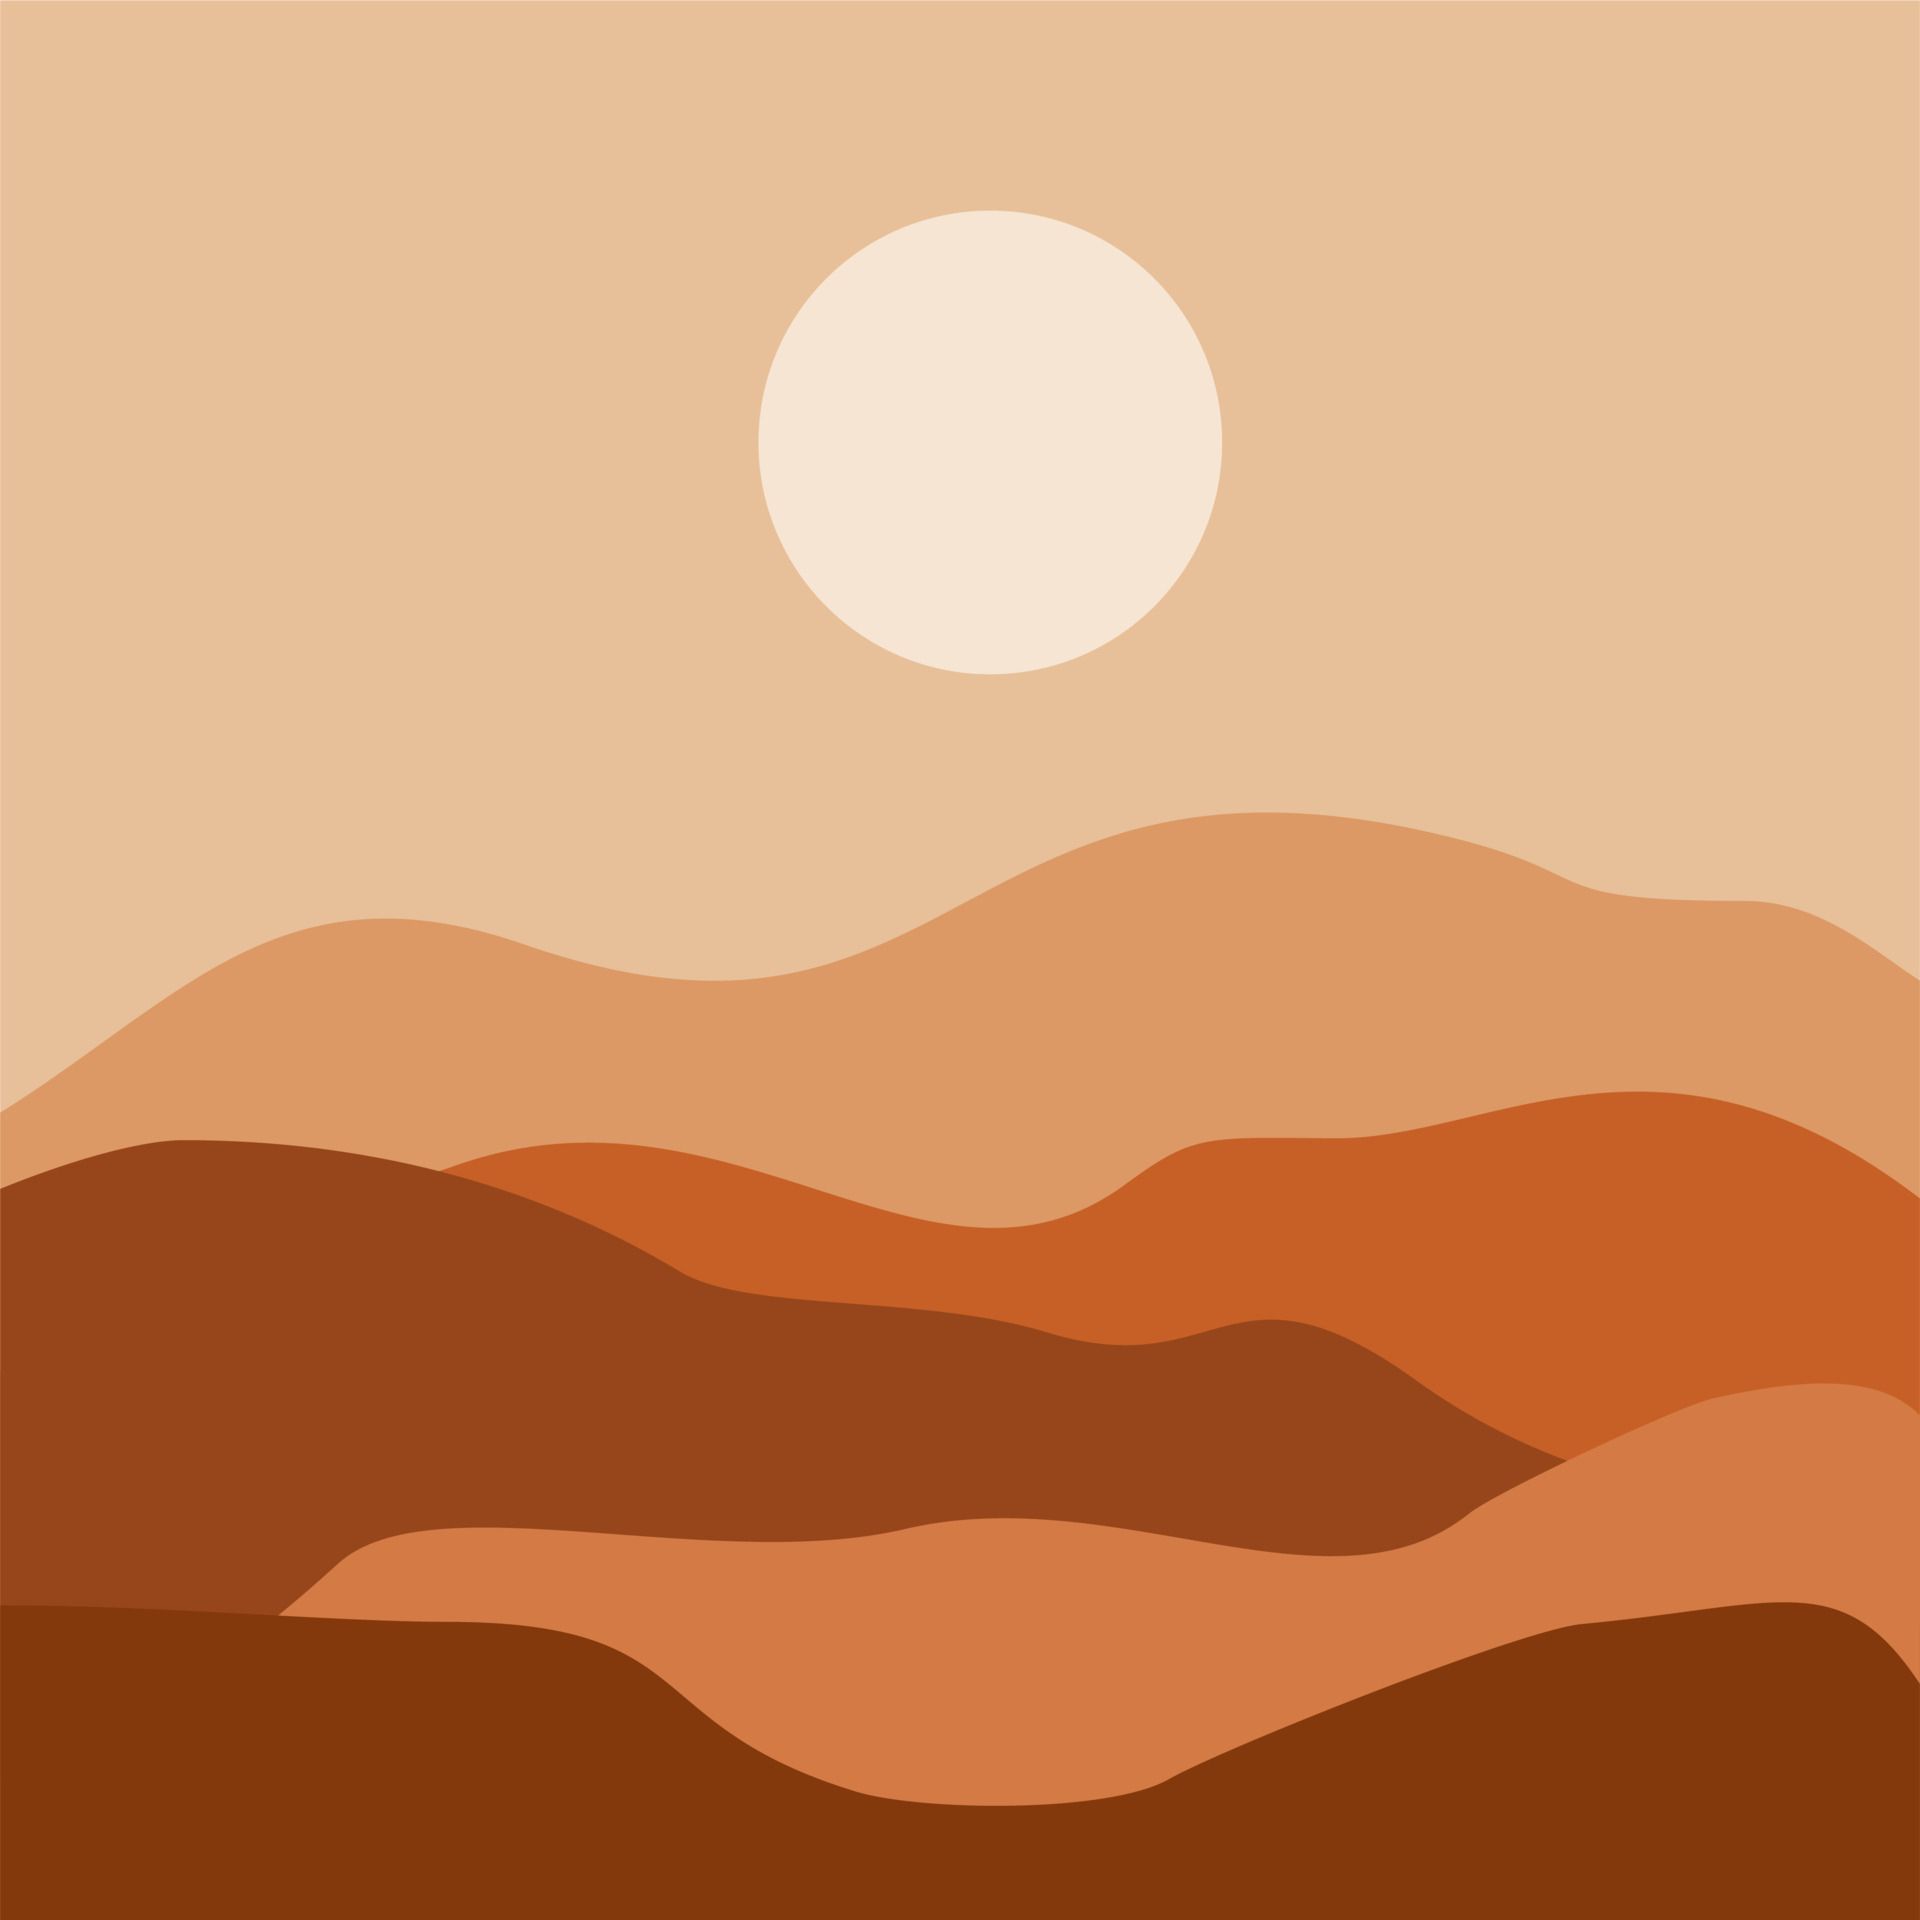 Abstract Contemporary Aesthetic Background With Desert, Mountains, Sun.  Earth Tones, Burnt Orange, Terracotta Colors. Boho Wall Decor. Landscapes  Set With Sunrise, Sunset. Earth Tones, Pastel Colors (View 18 of 20)